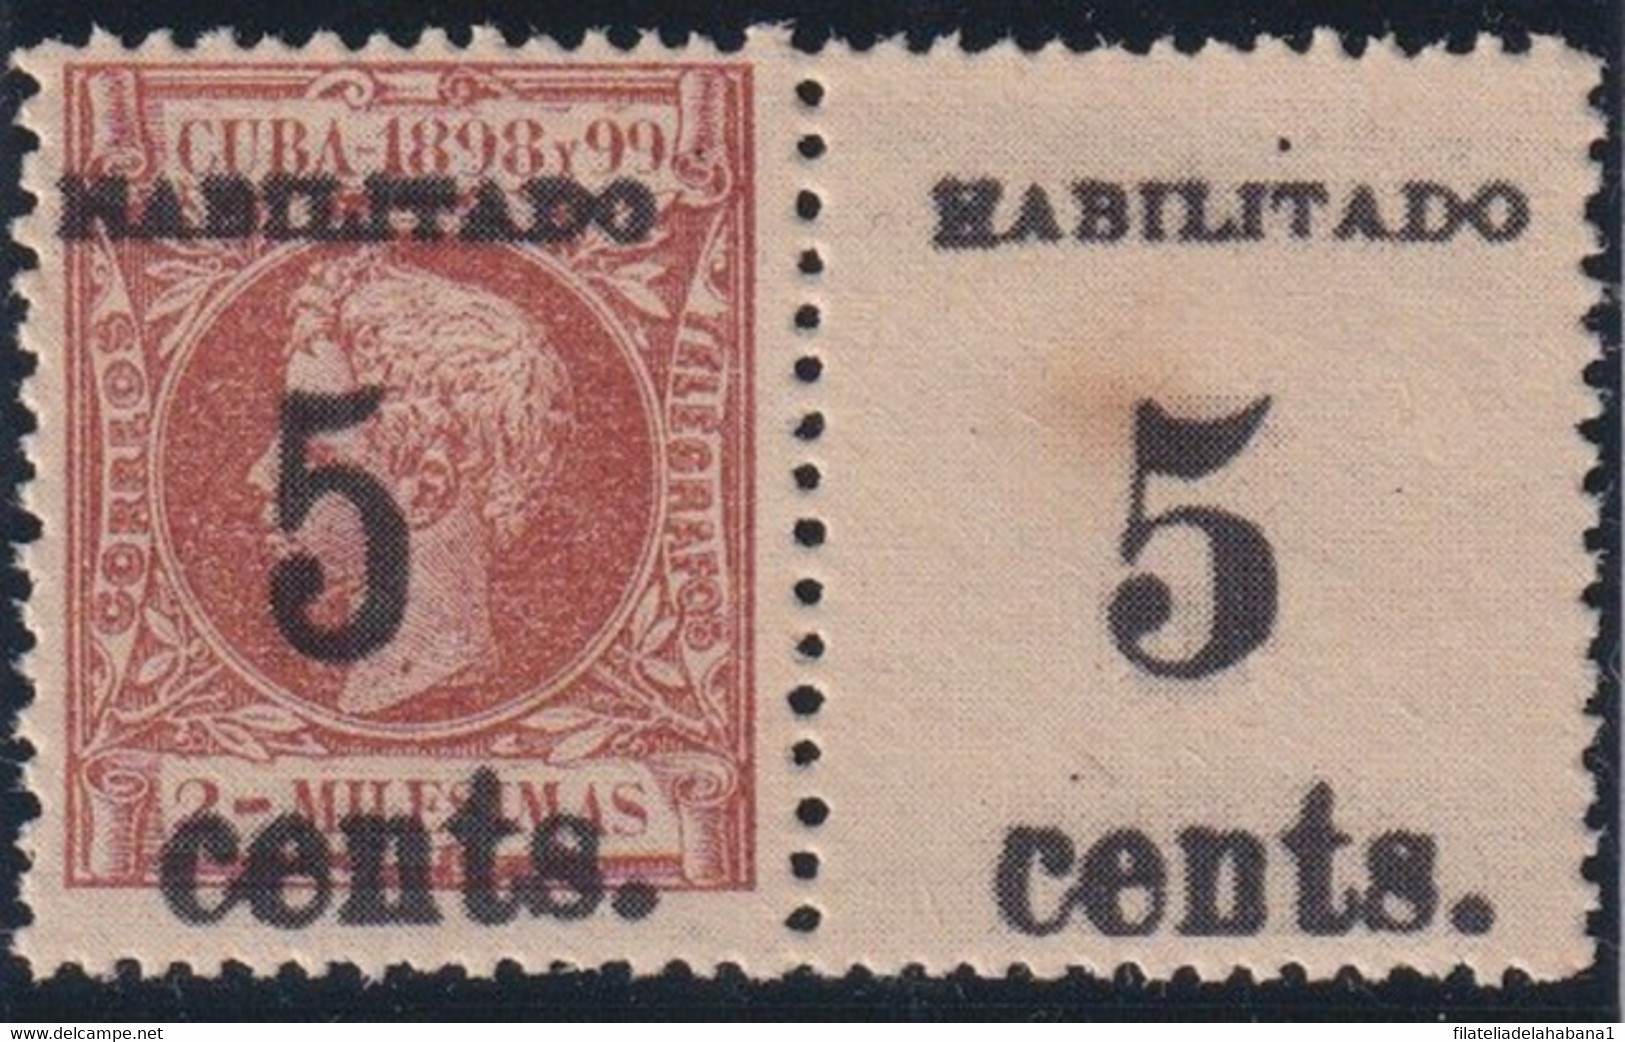 1899-608 CUBA 1899 US OCCUPATION. FORGERY PUERTO PRINCIPE. 2º ISSUE. 5c S. 5 Mls. PAIR NORMAL + SMALL NUMBER. - Neufs